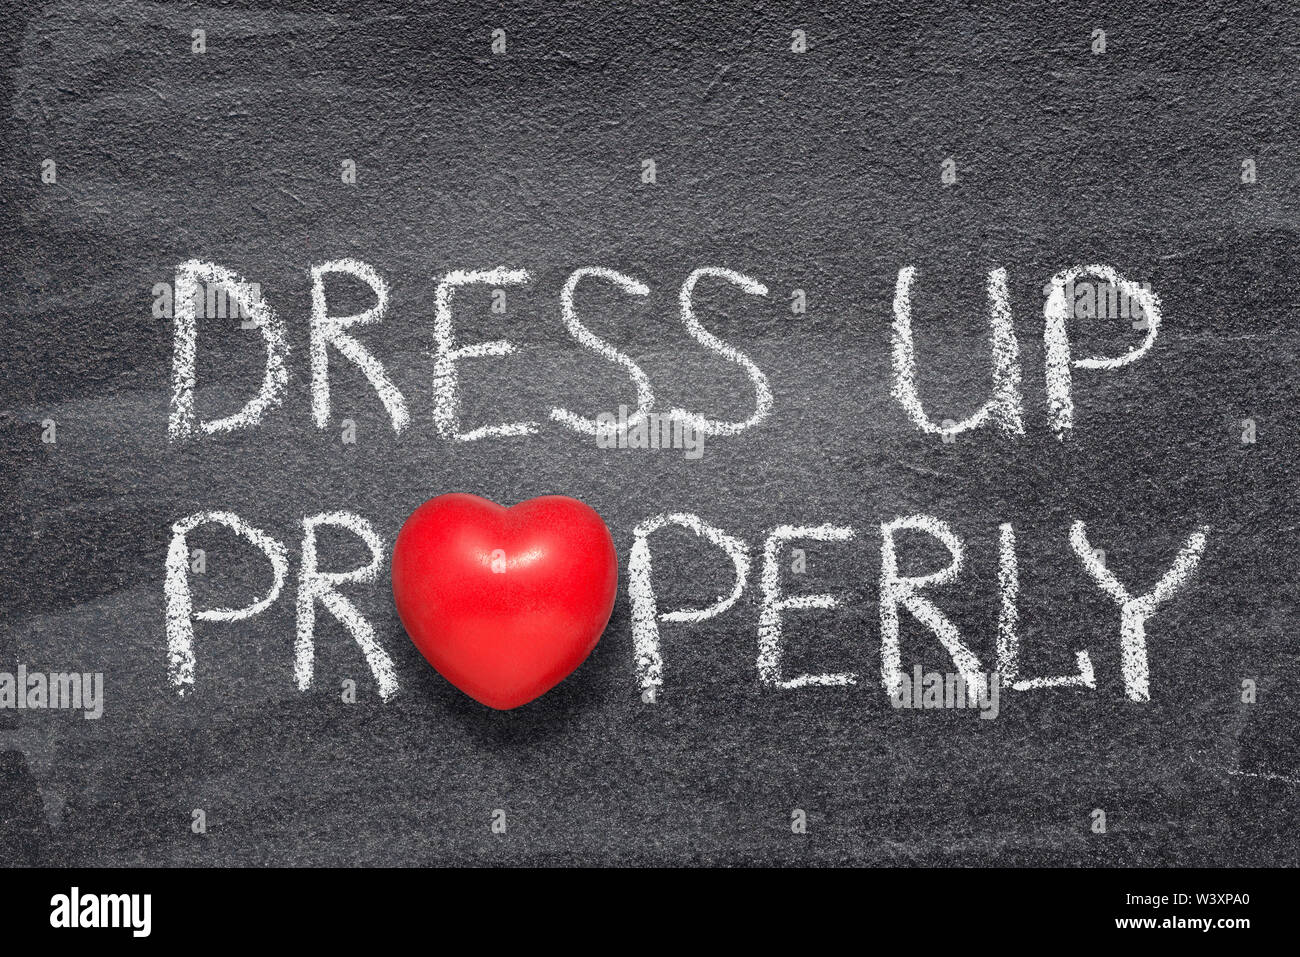 dress up properly phrase handwritten on chalkboard with red heart symbol instead of O Stock Photo